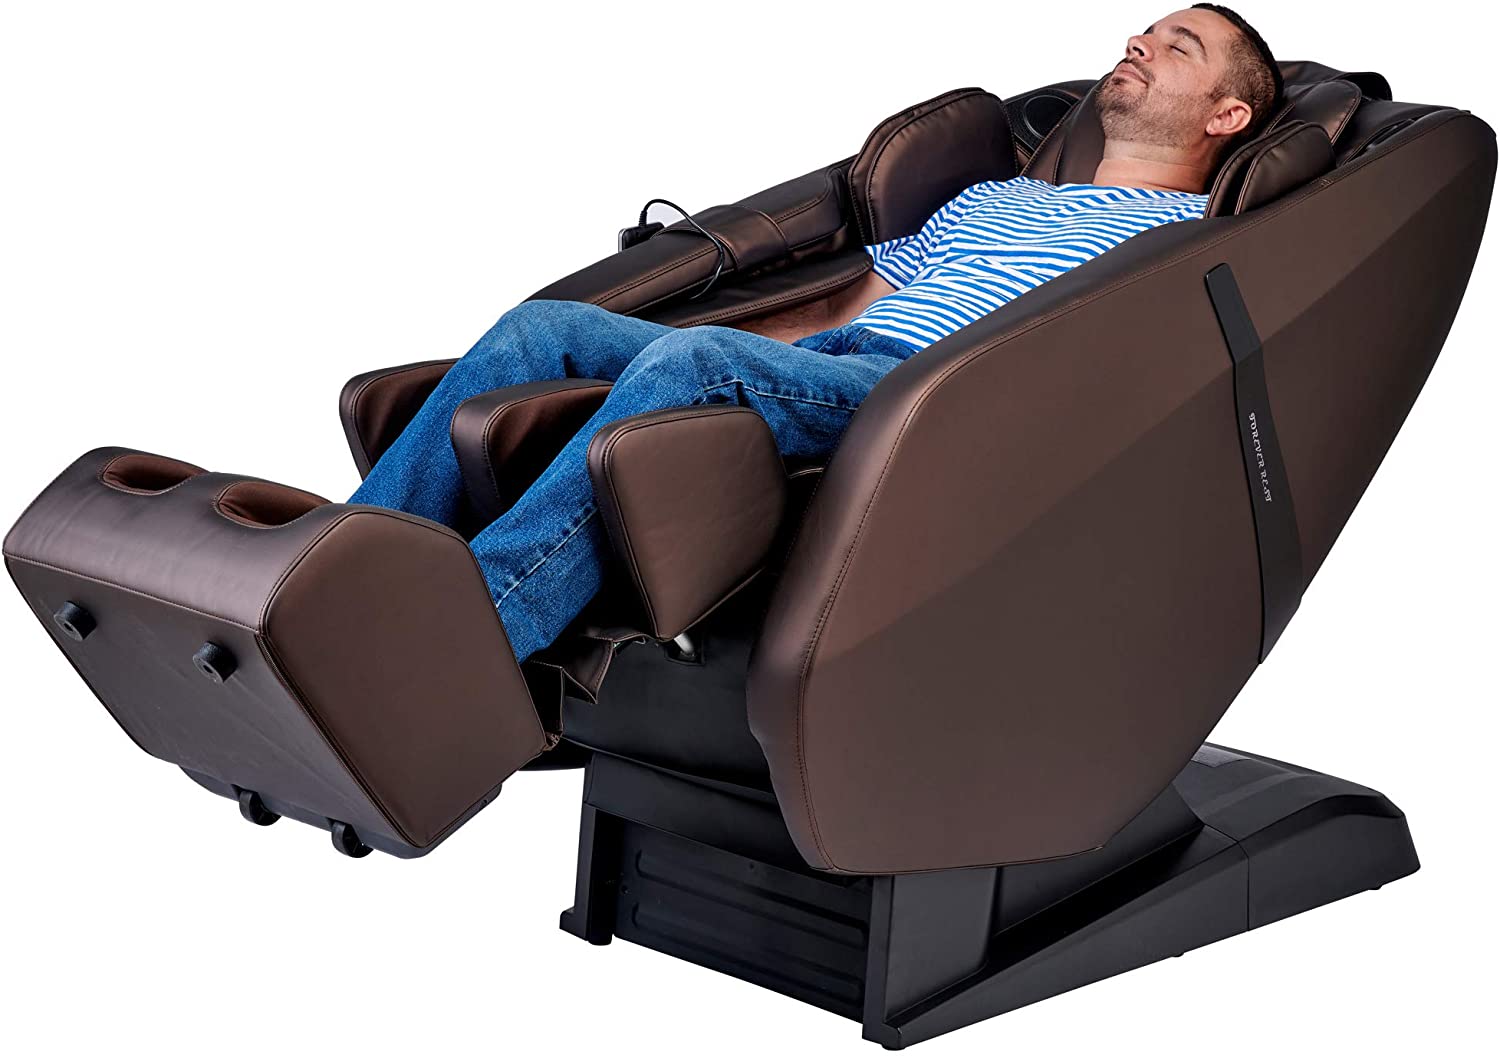 Forever Rest massage chair